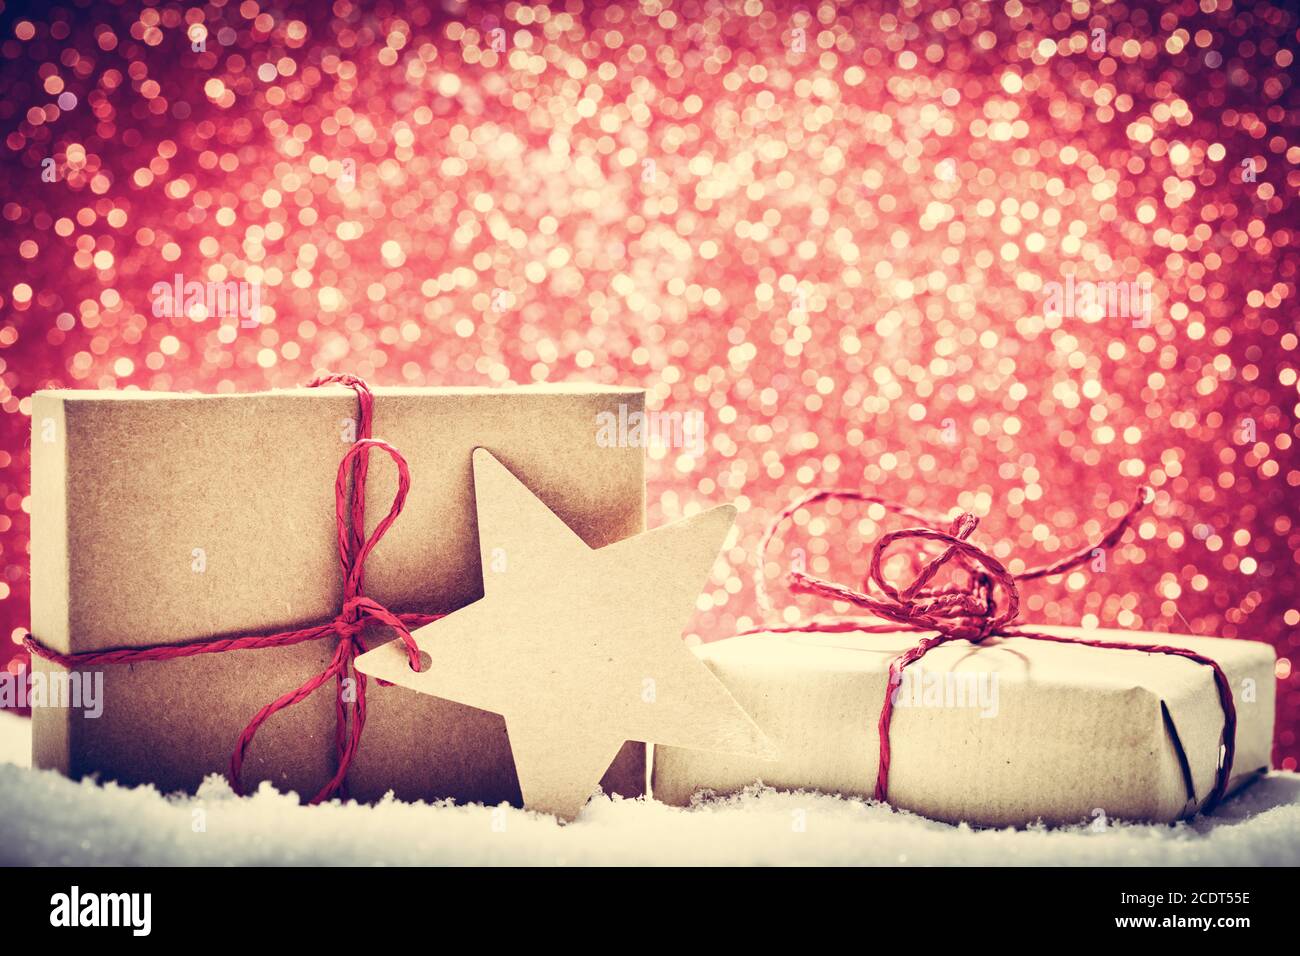 Retro rustic Christmas gifts, presents in snow on glitter background Stock Photo